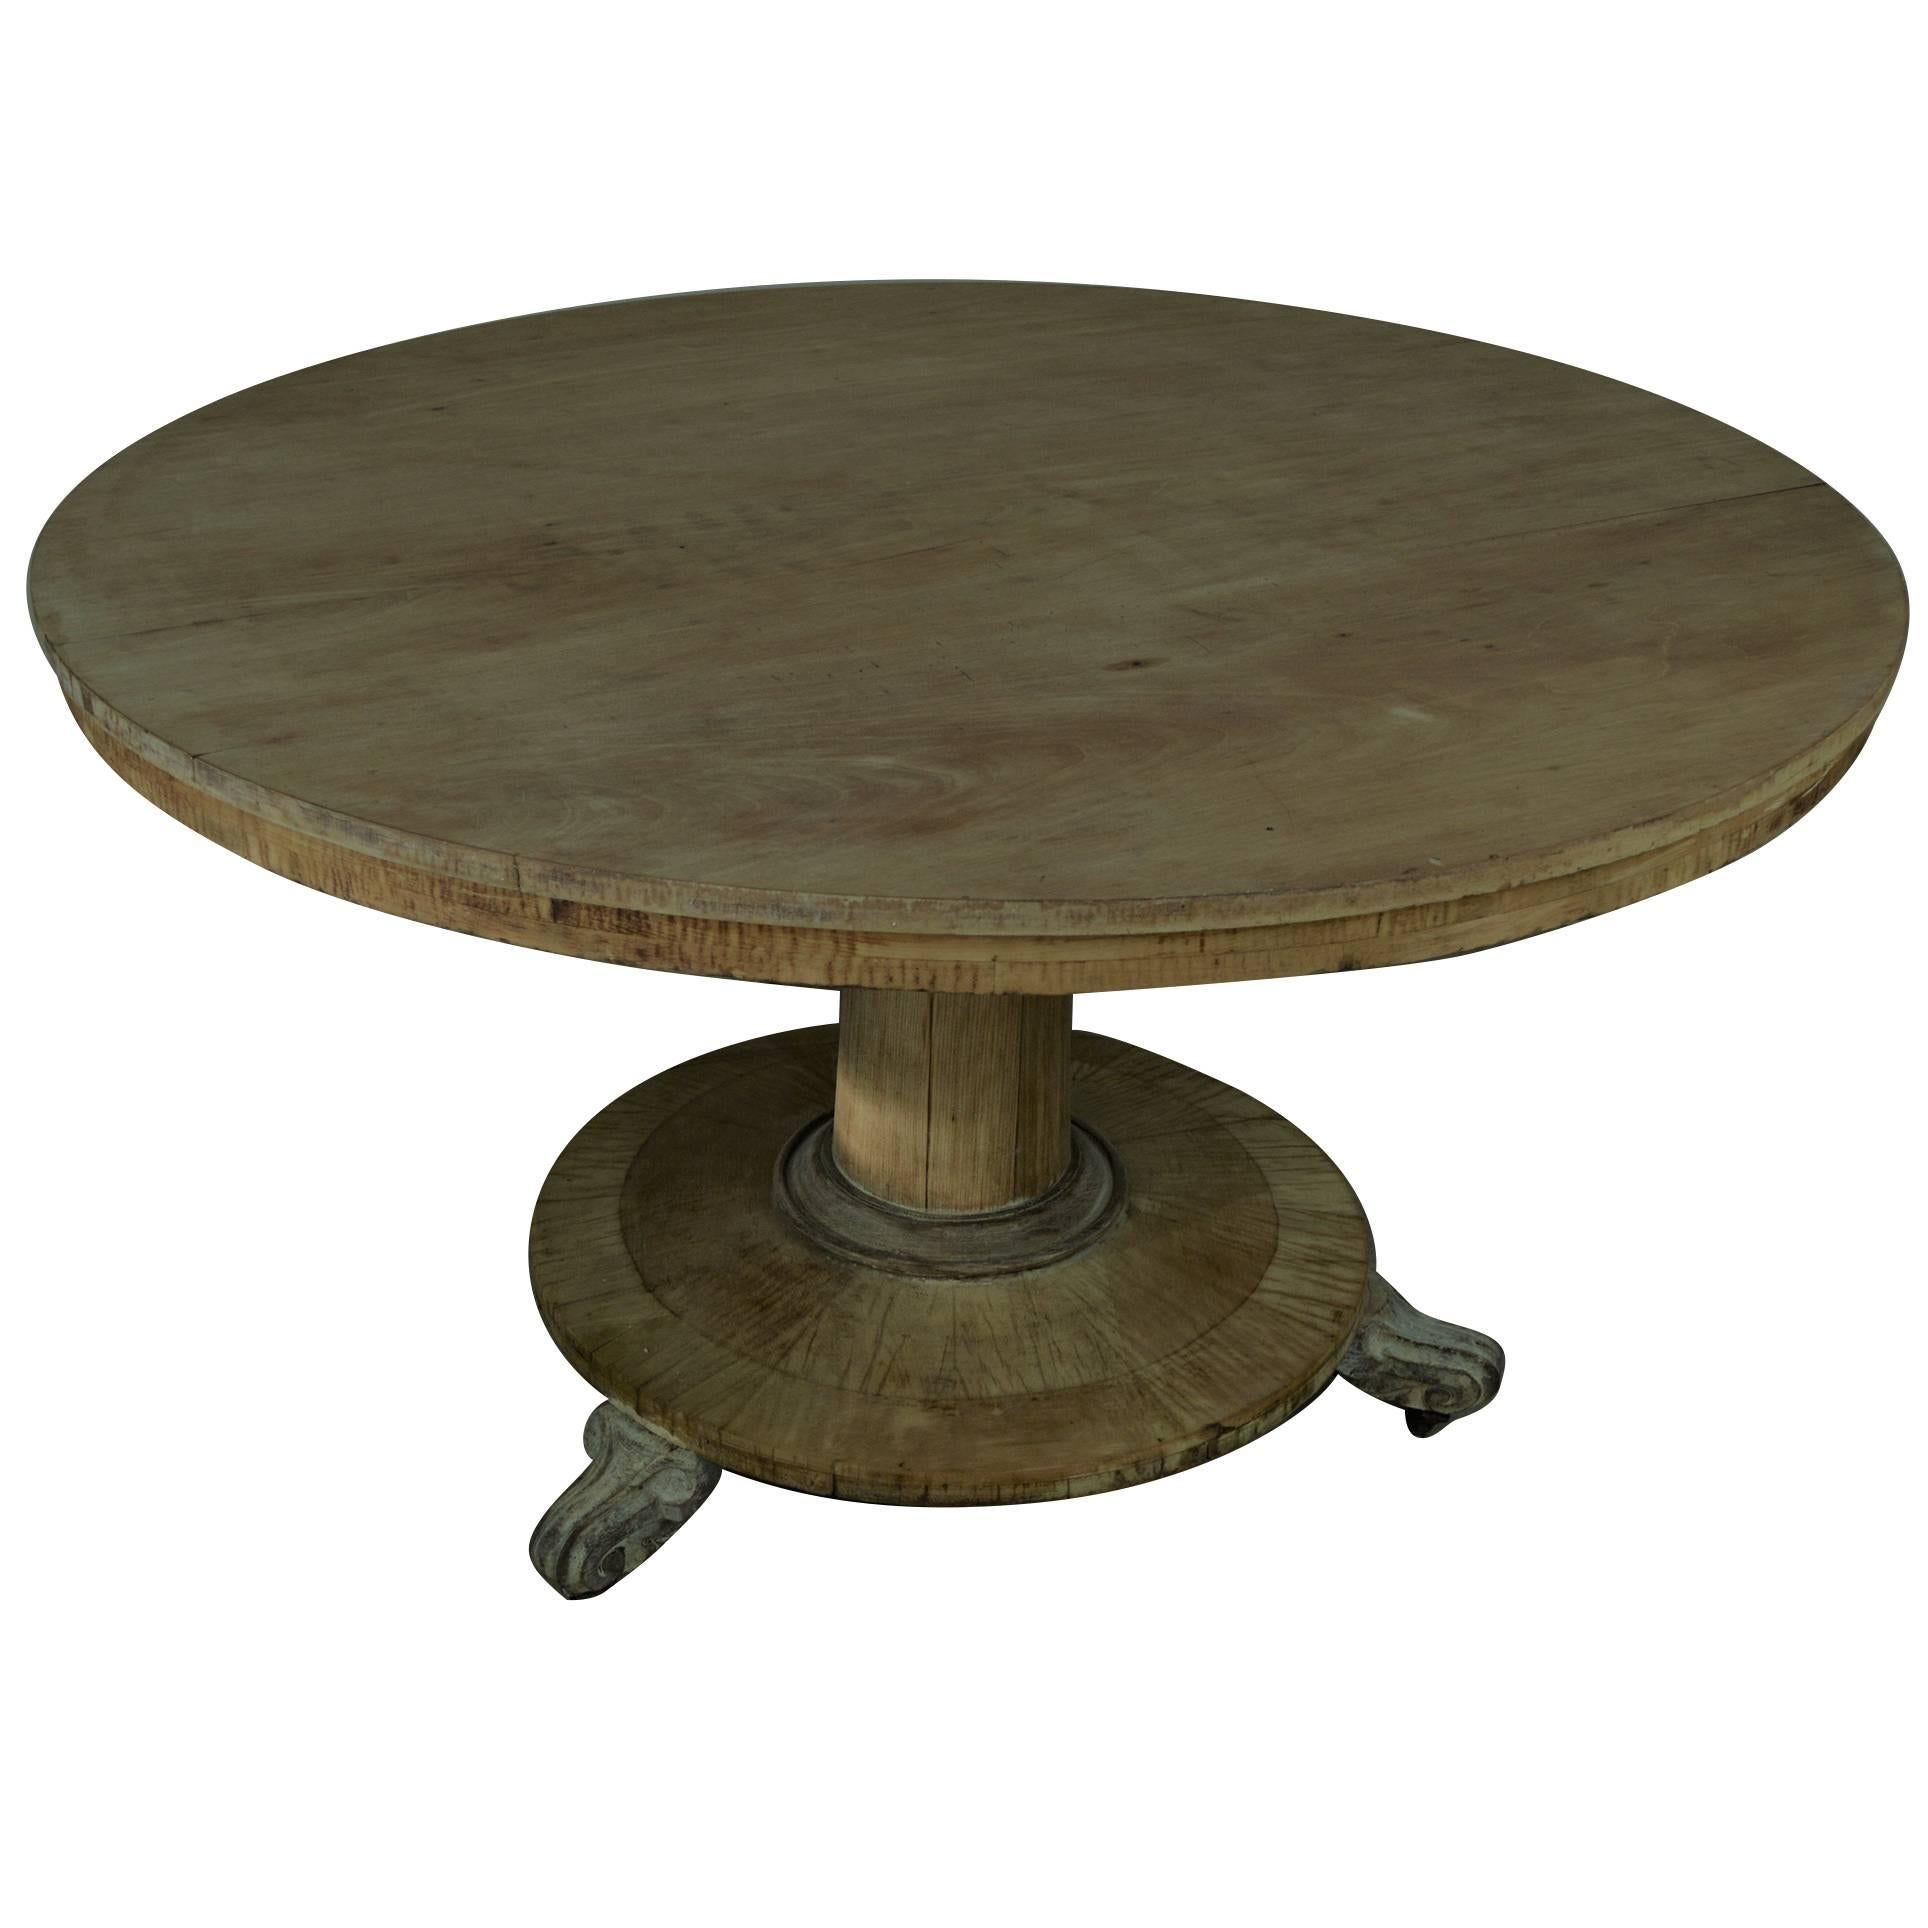 Large Round Antique Bleached Dining Table, English Regency